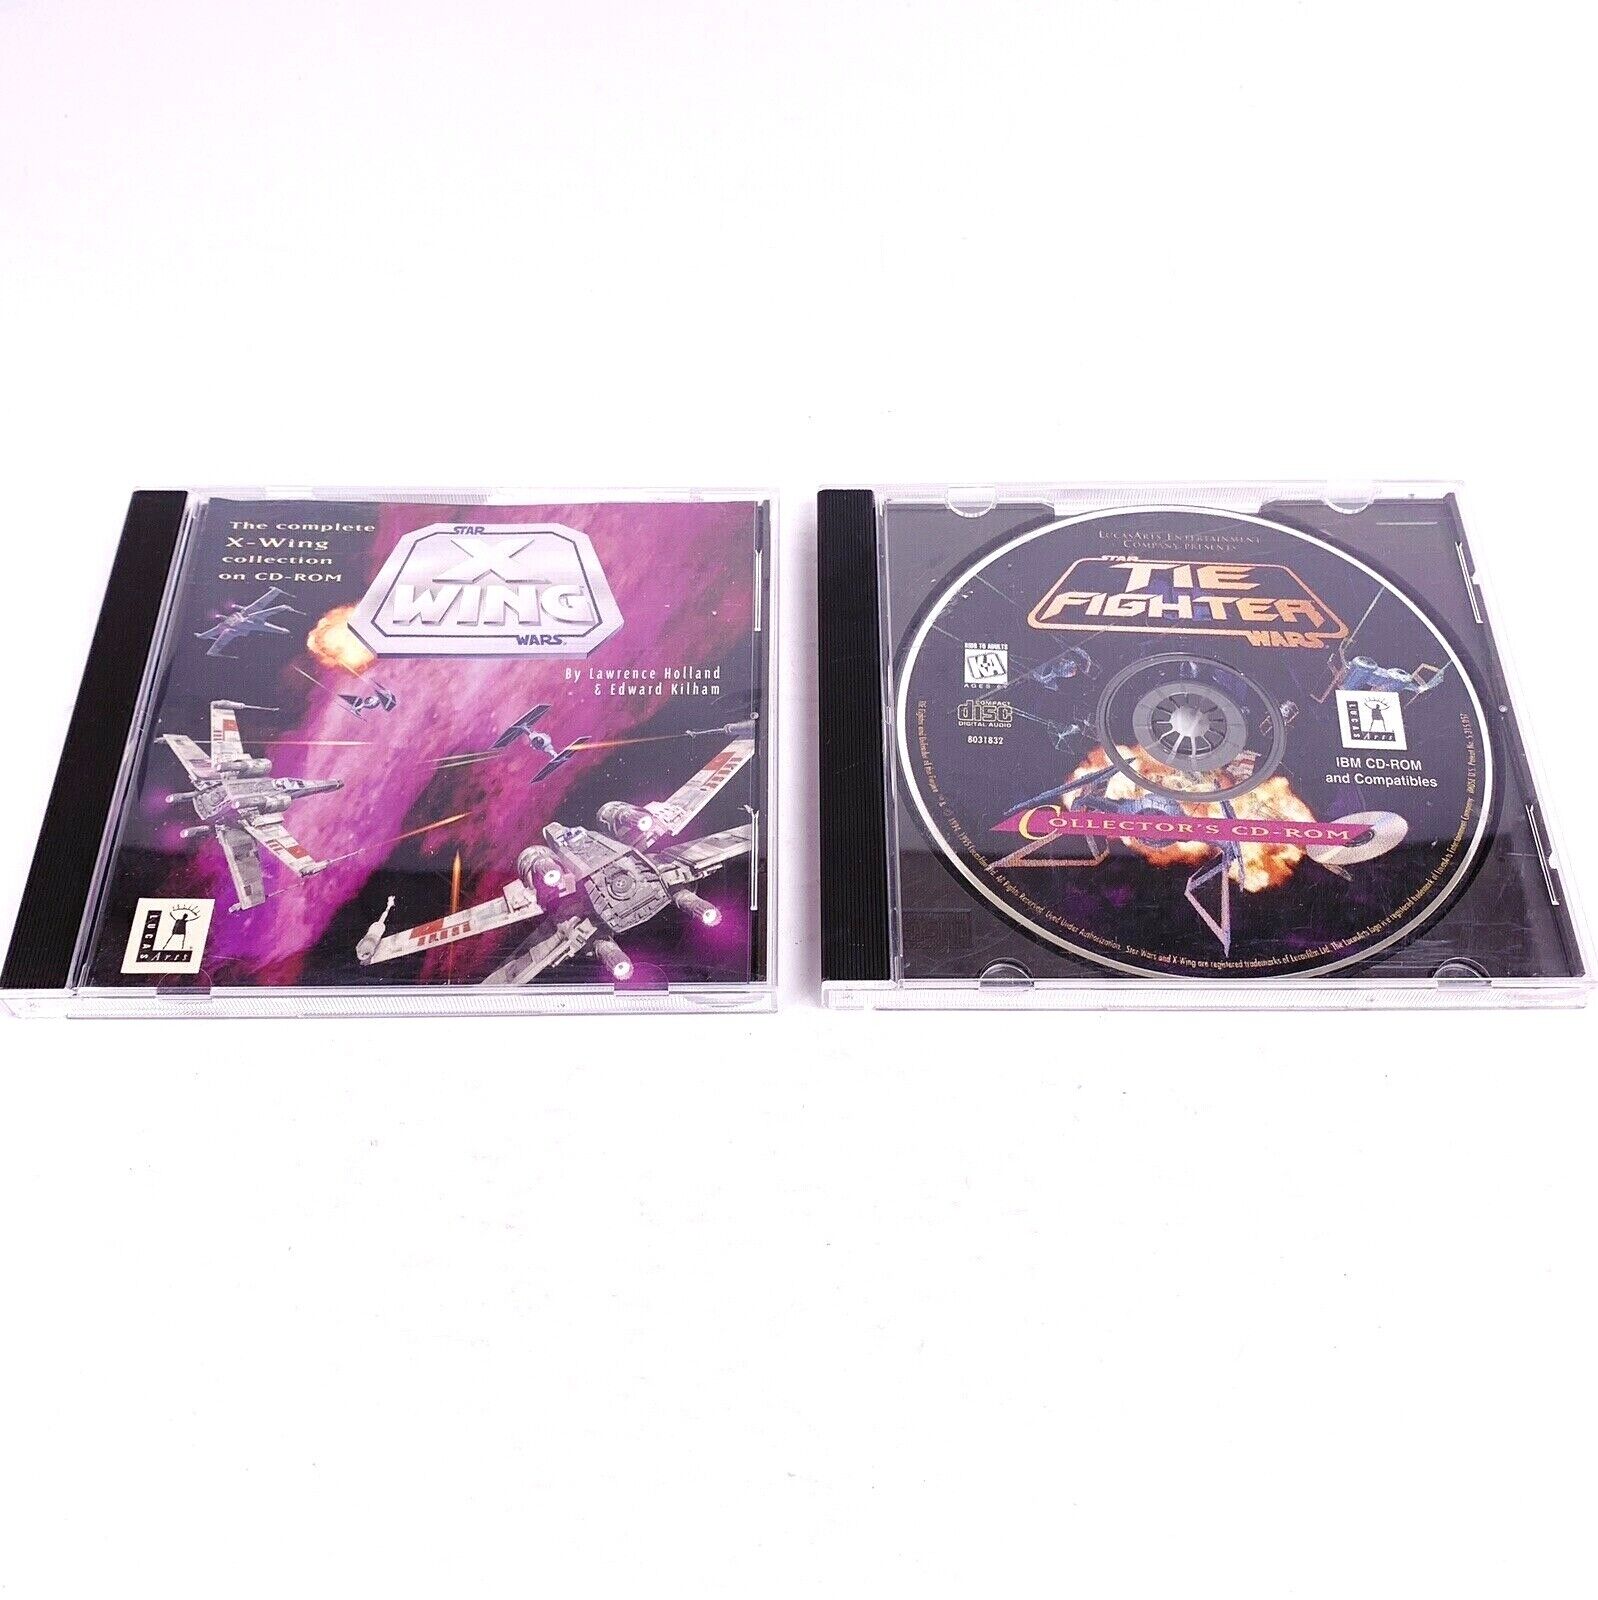 Vtg PC Games - Star Wars Tie Fighter & X Wing Collectors CD Rom Lucasarts